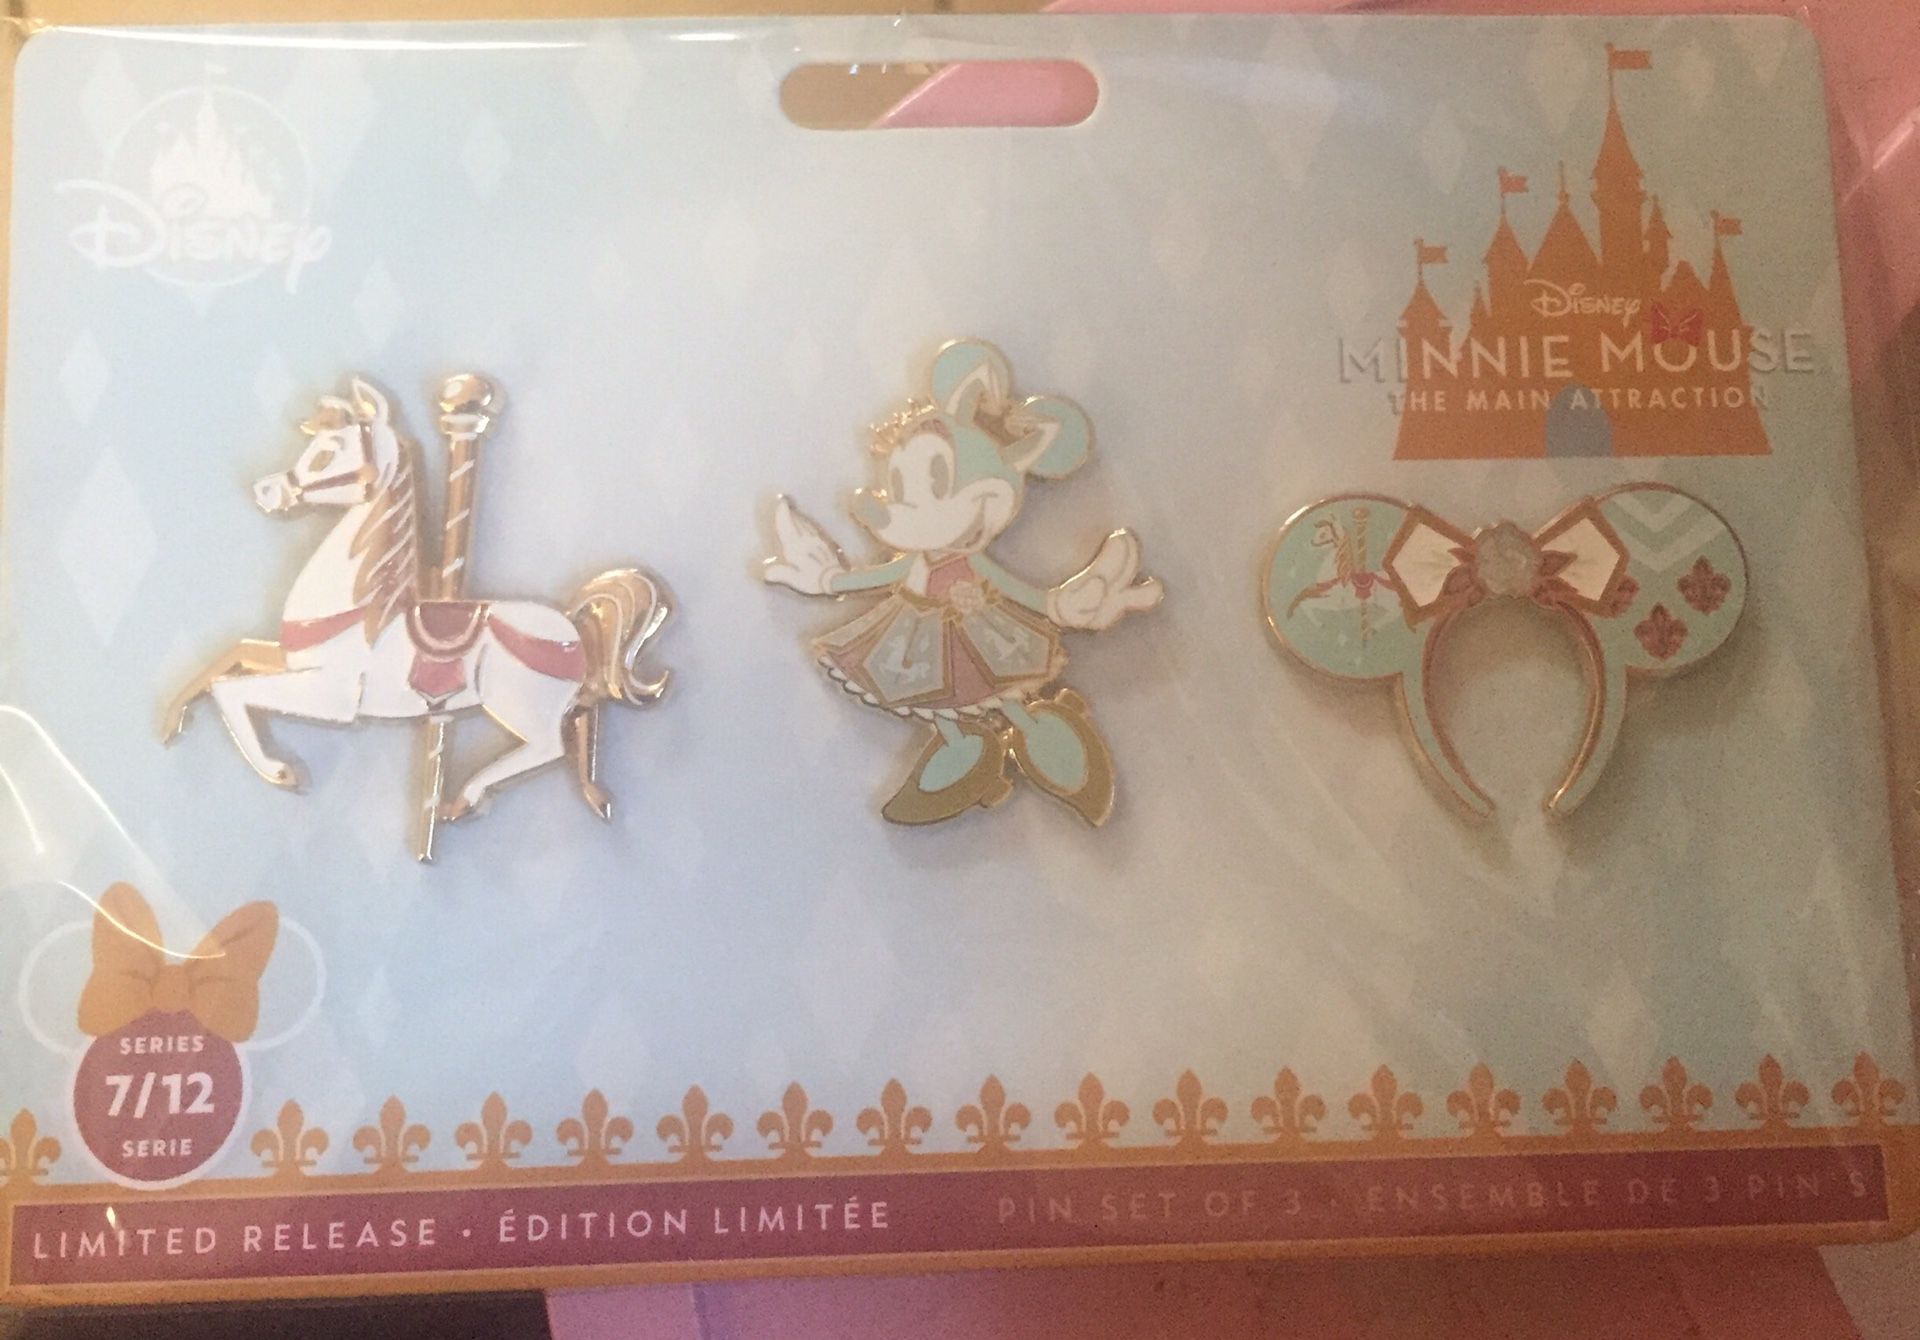 Disney Minnie Mouse attraction series 7 pins